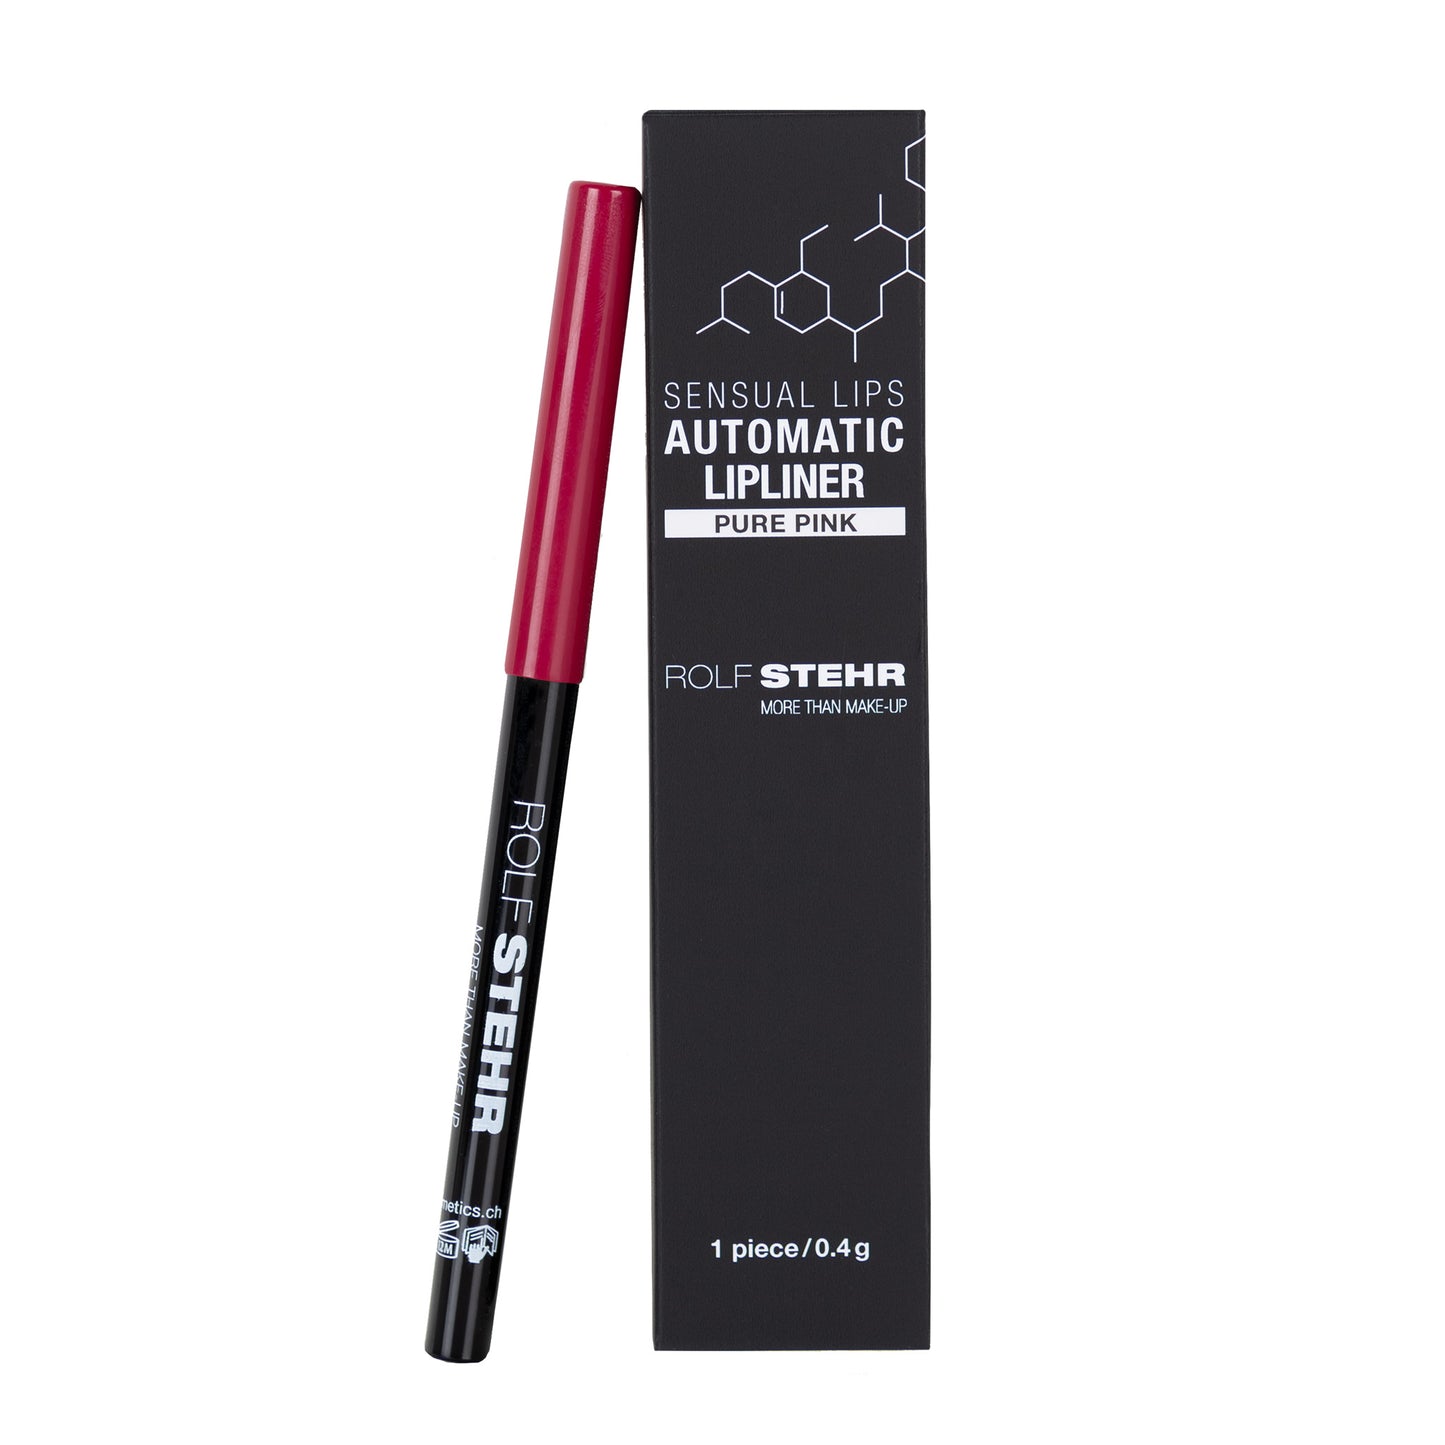 Automatic Lipliner - Pure Pink <br> More than Make up